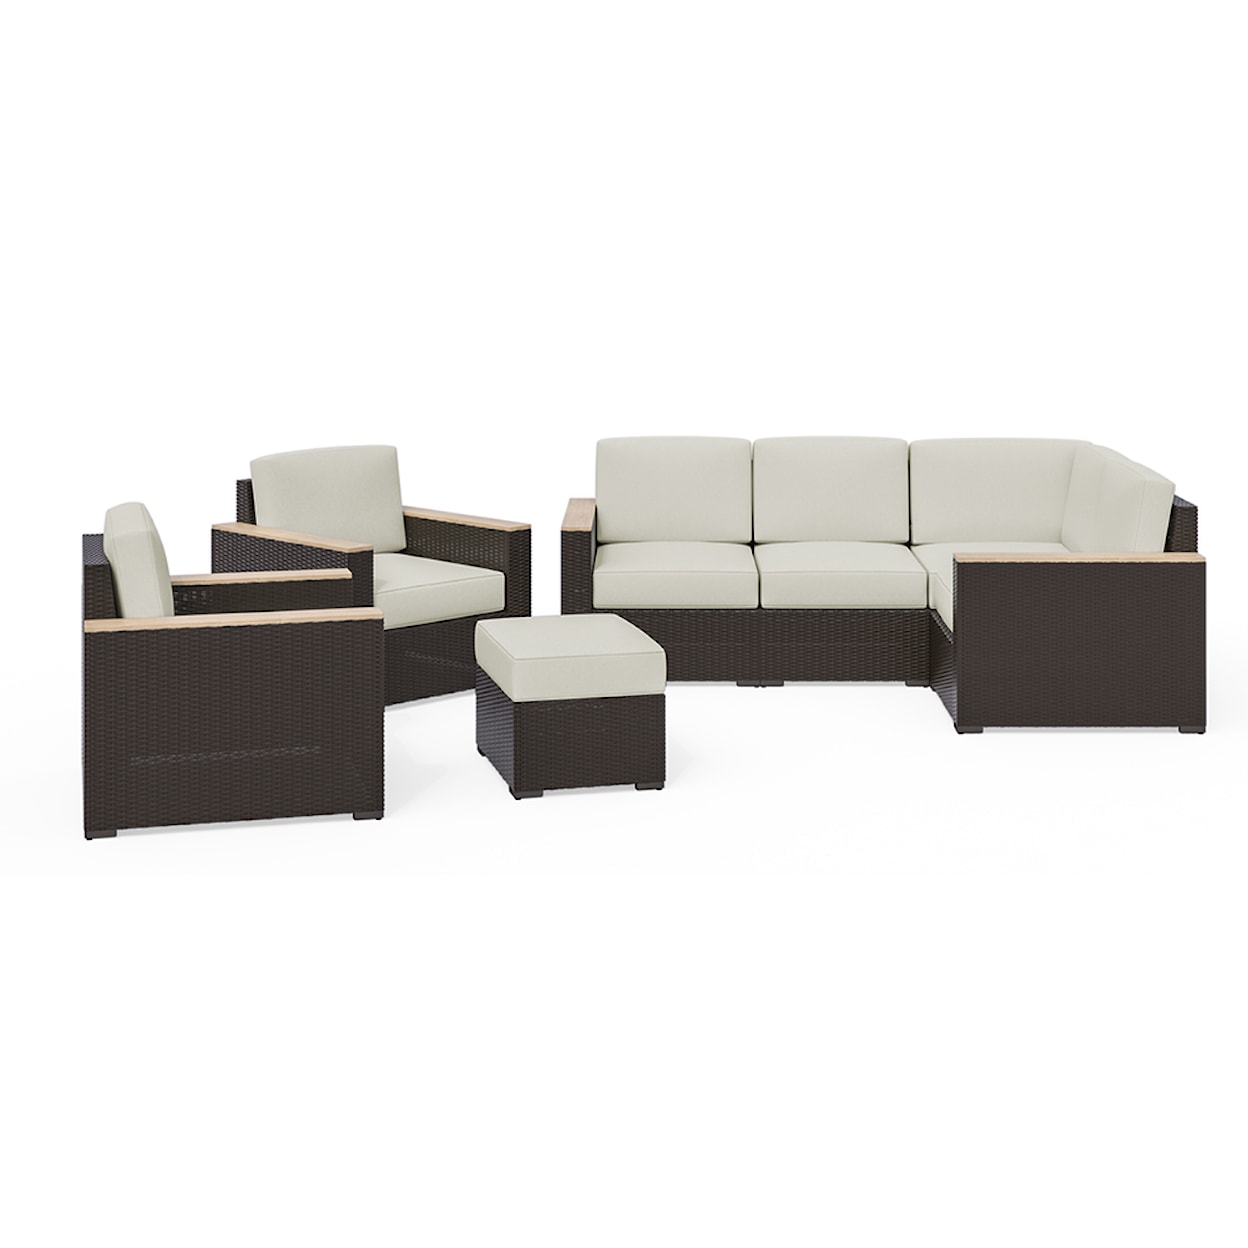 homestyles Palm Springs Outdoor Sectional Sofa and Arm Chair Set